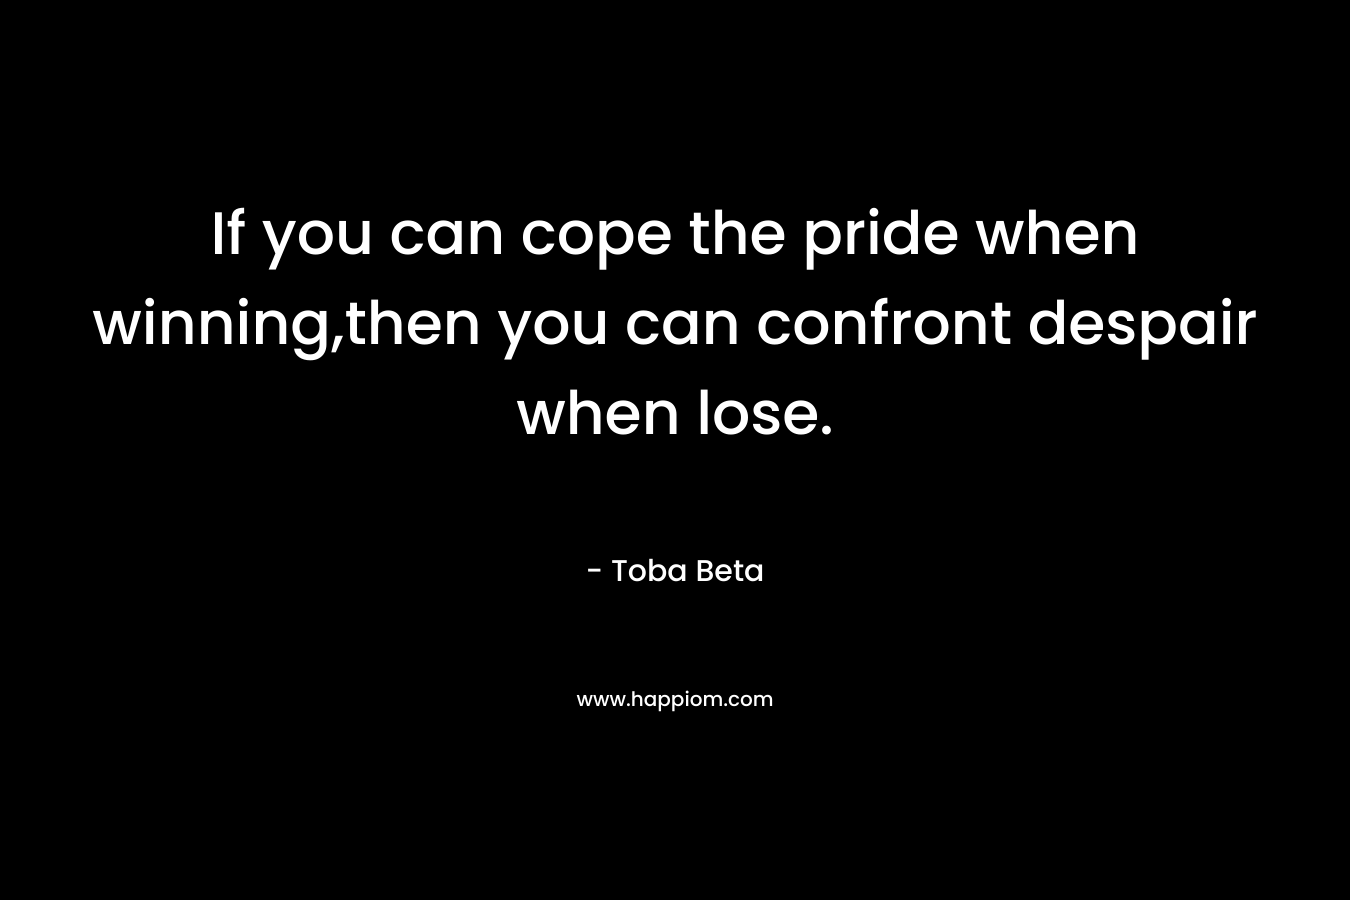 If you can cope the pride when winning,then you can confront despair when lose. – Toba Beta